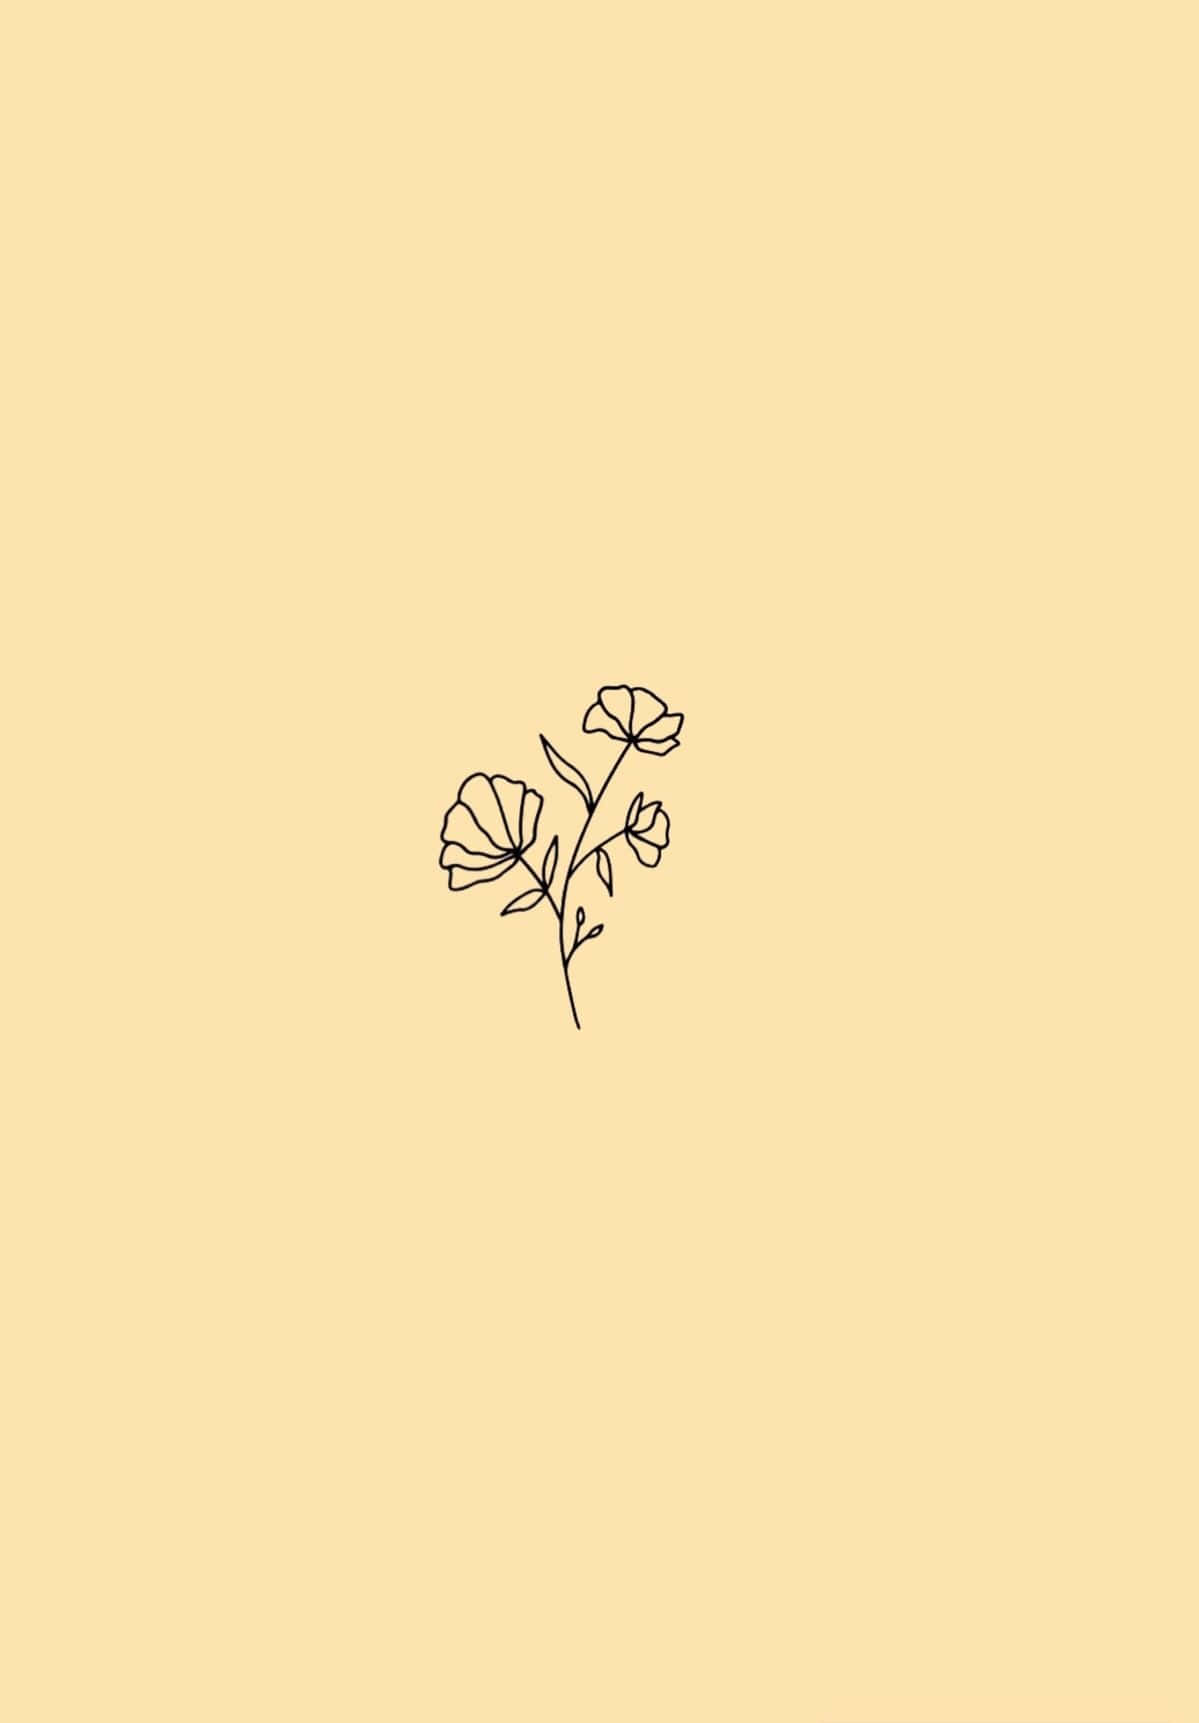 A simple drawing of three flowers on a yellow background - Pastel minimalist